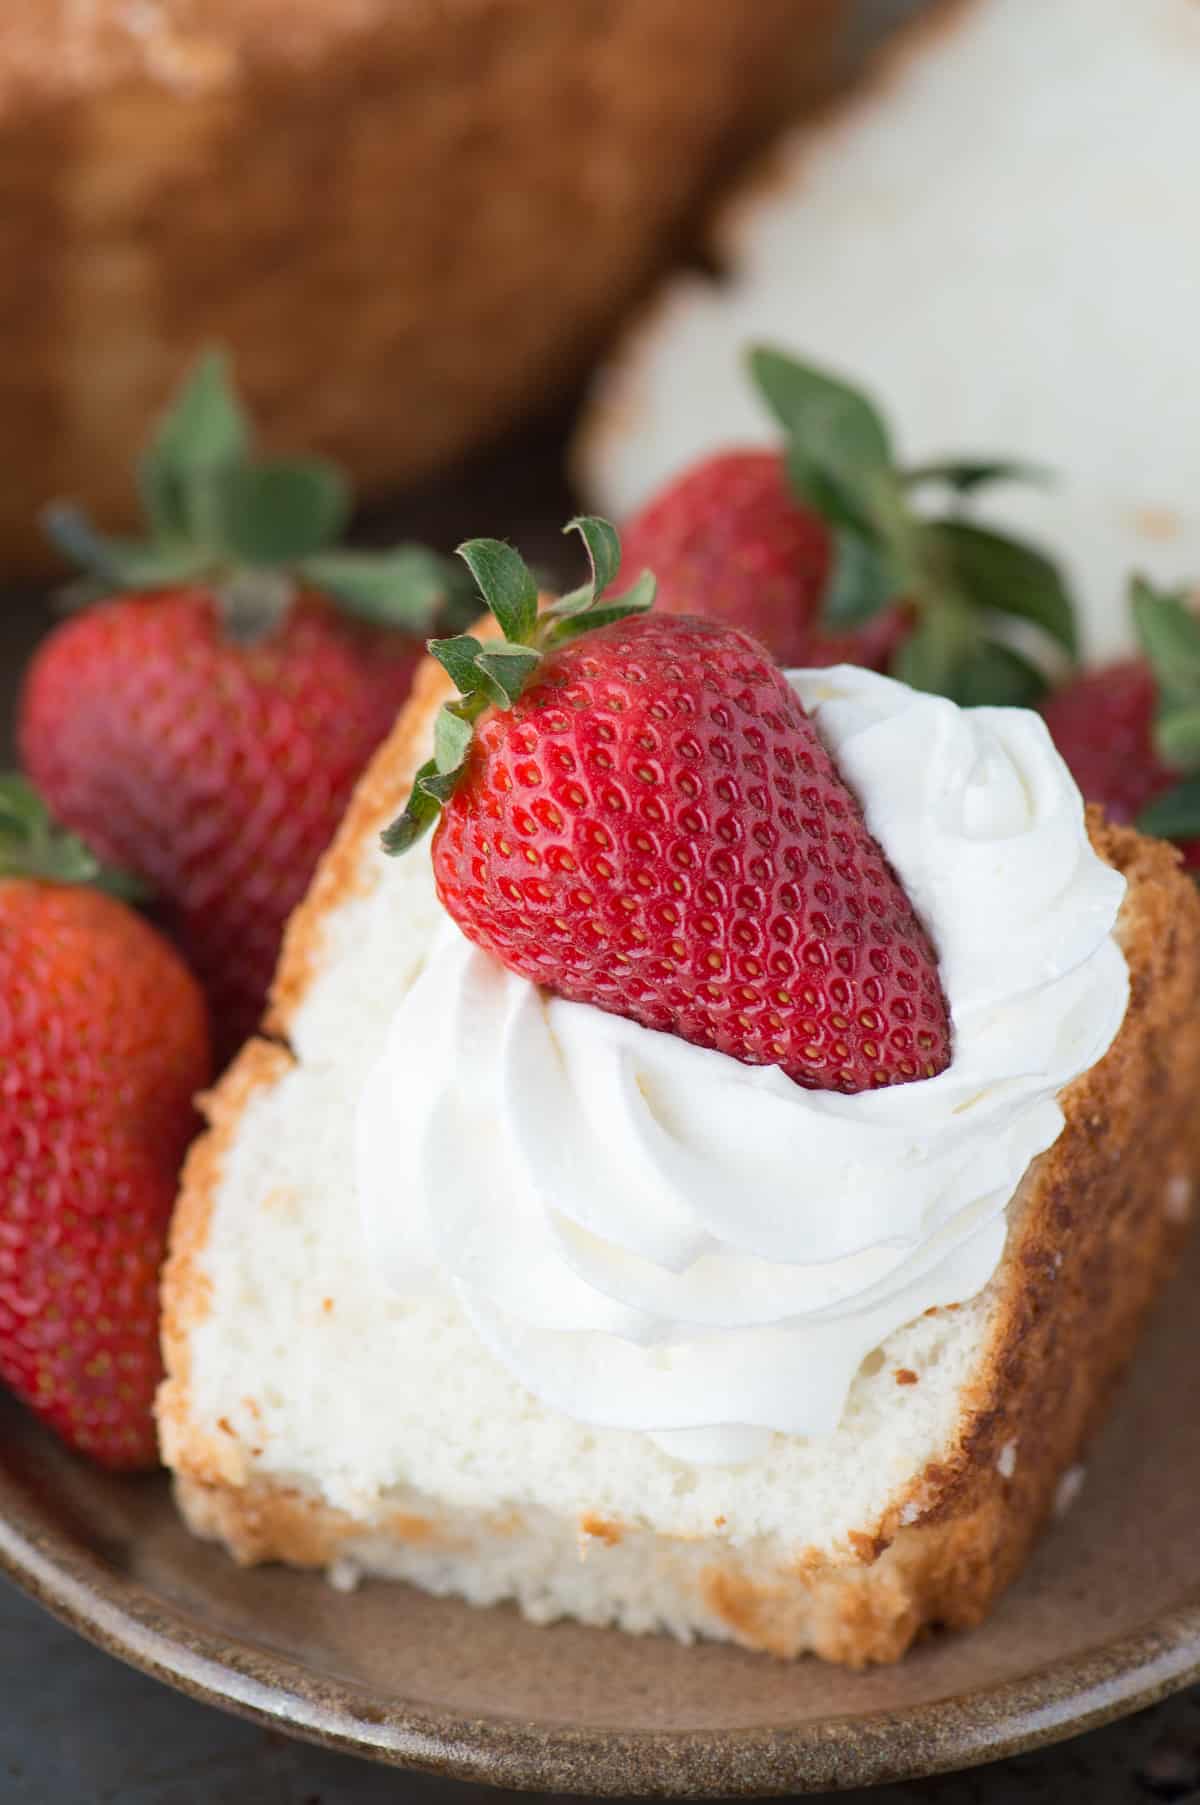 100% homemade angel food cake! This is the recipe that everyone will ask you for! This recipe shows you how to use all purpose flour instead of cake flour, and you can easily make it gluten free! 